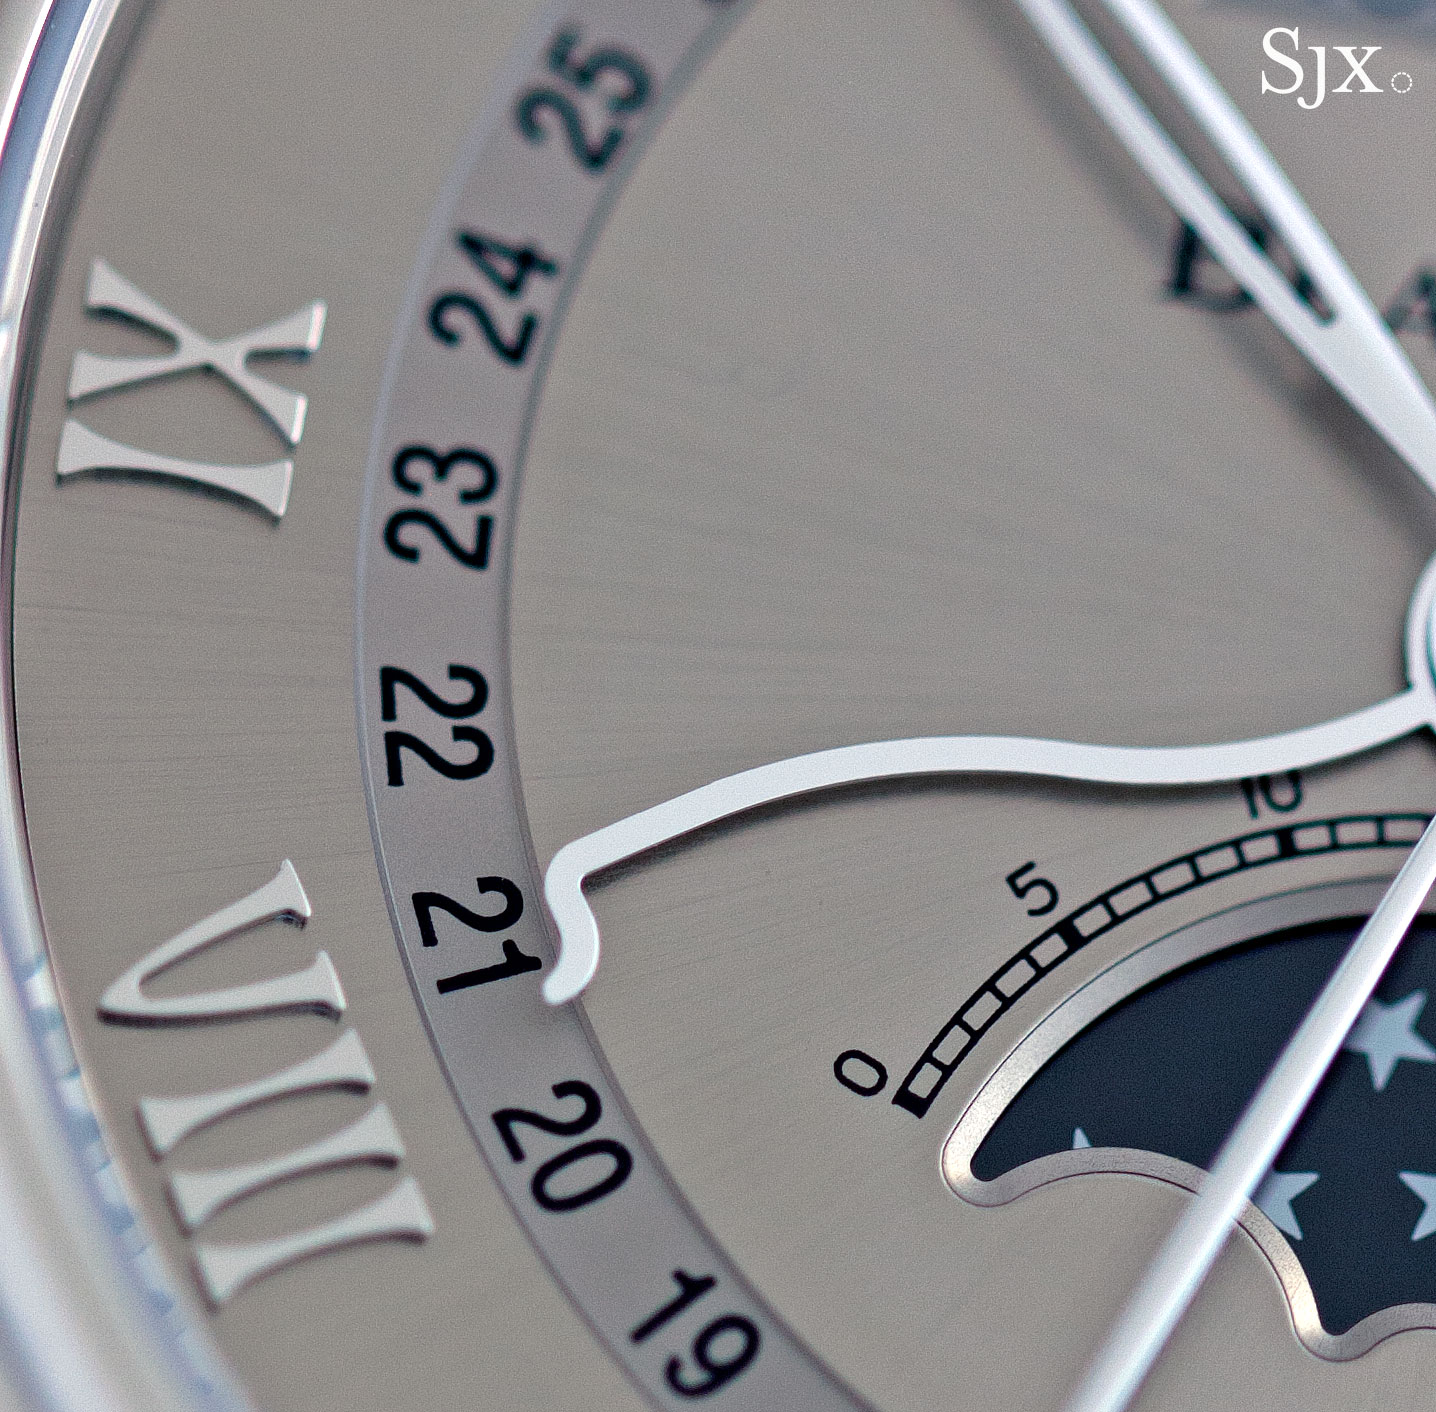 Up Close with the Blancpain Villeret Complete Calendar 40mm | SJX Watches